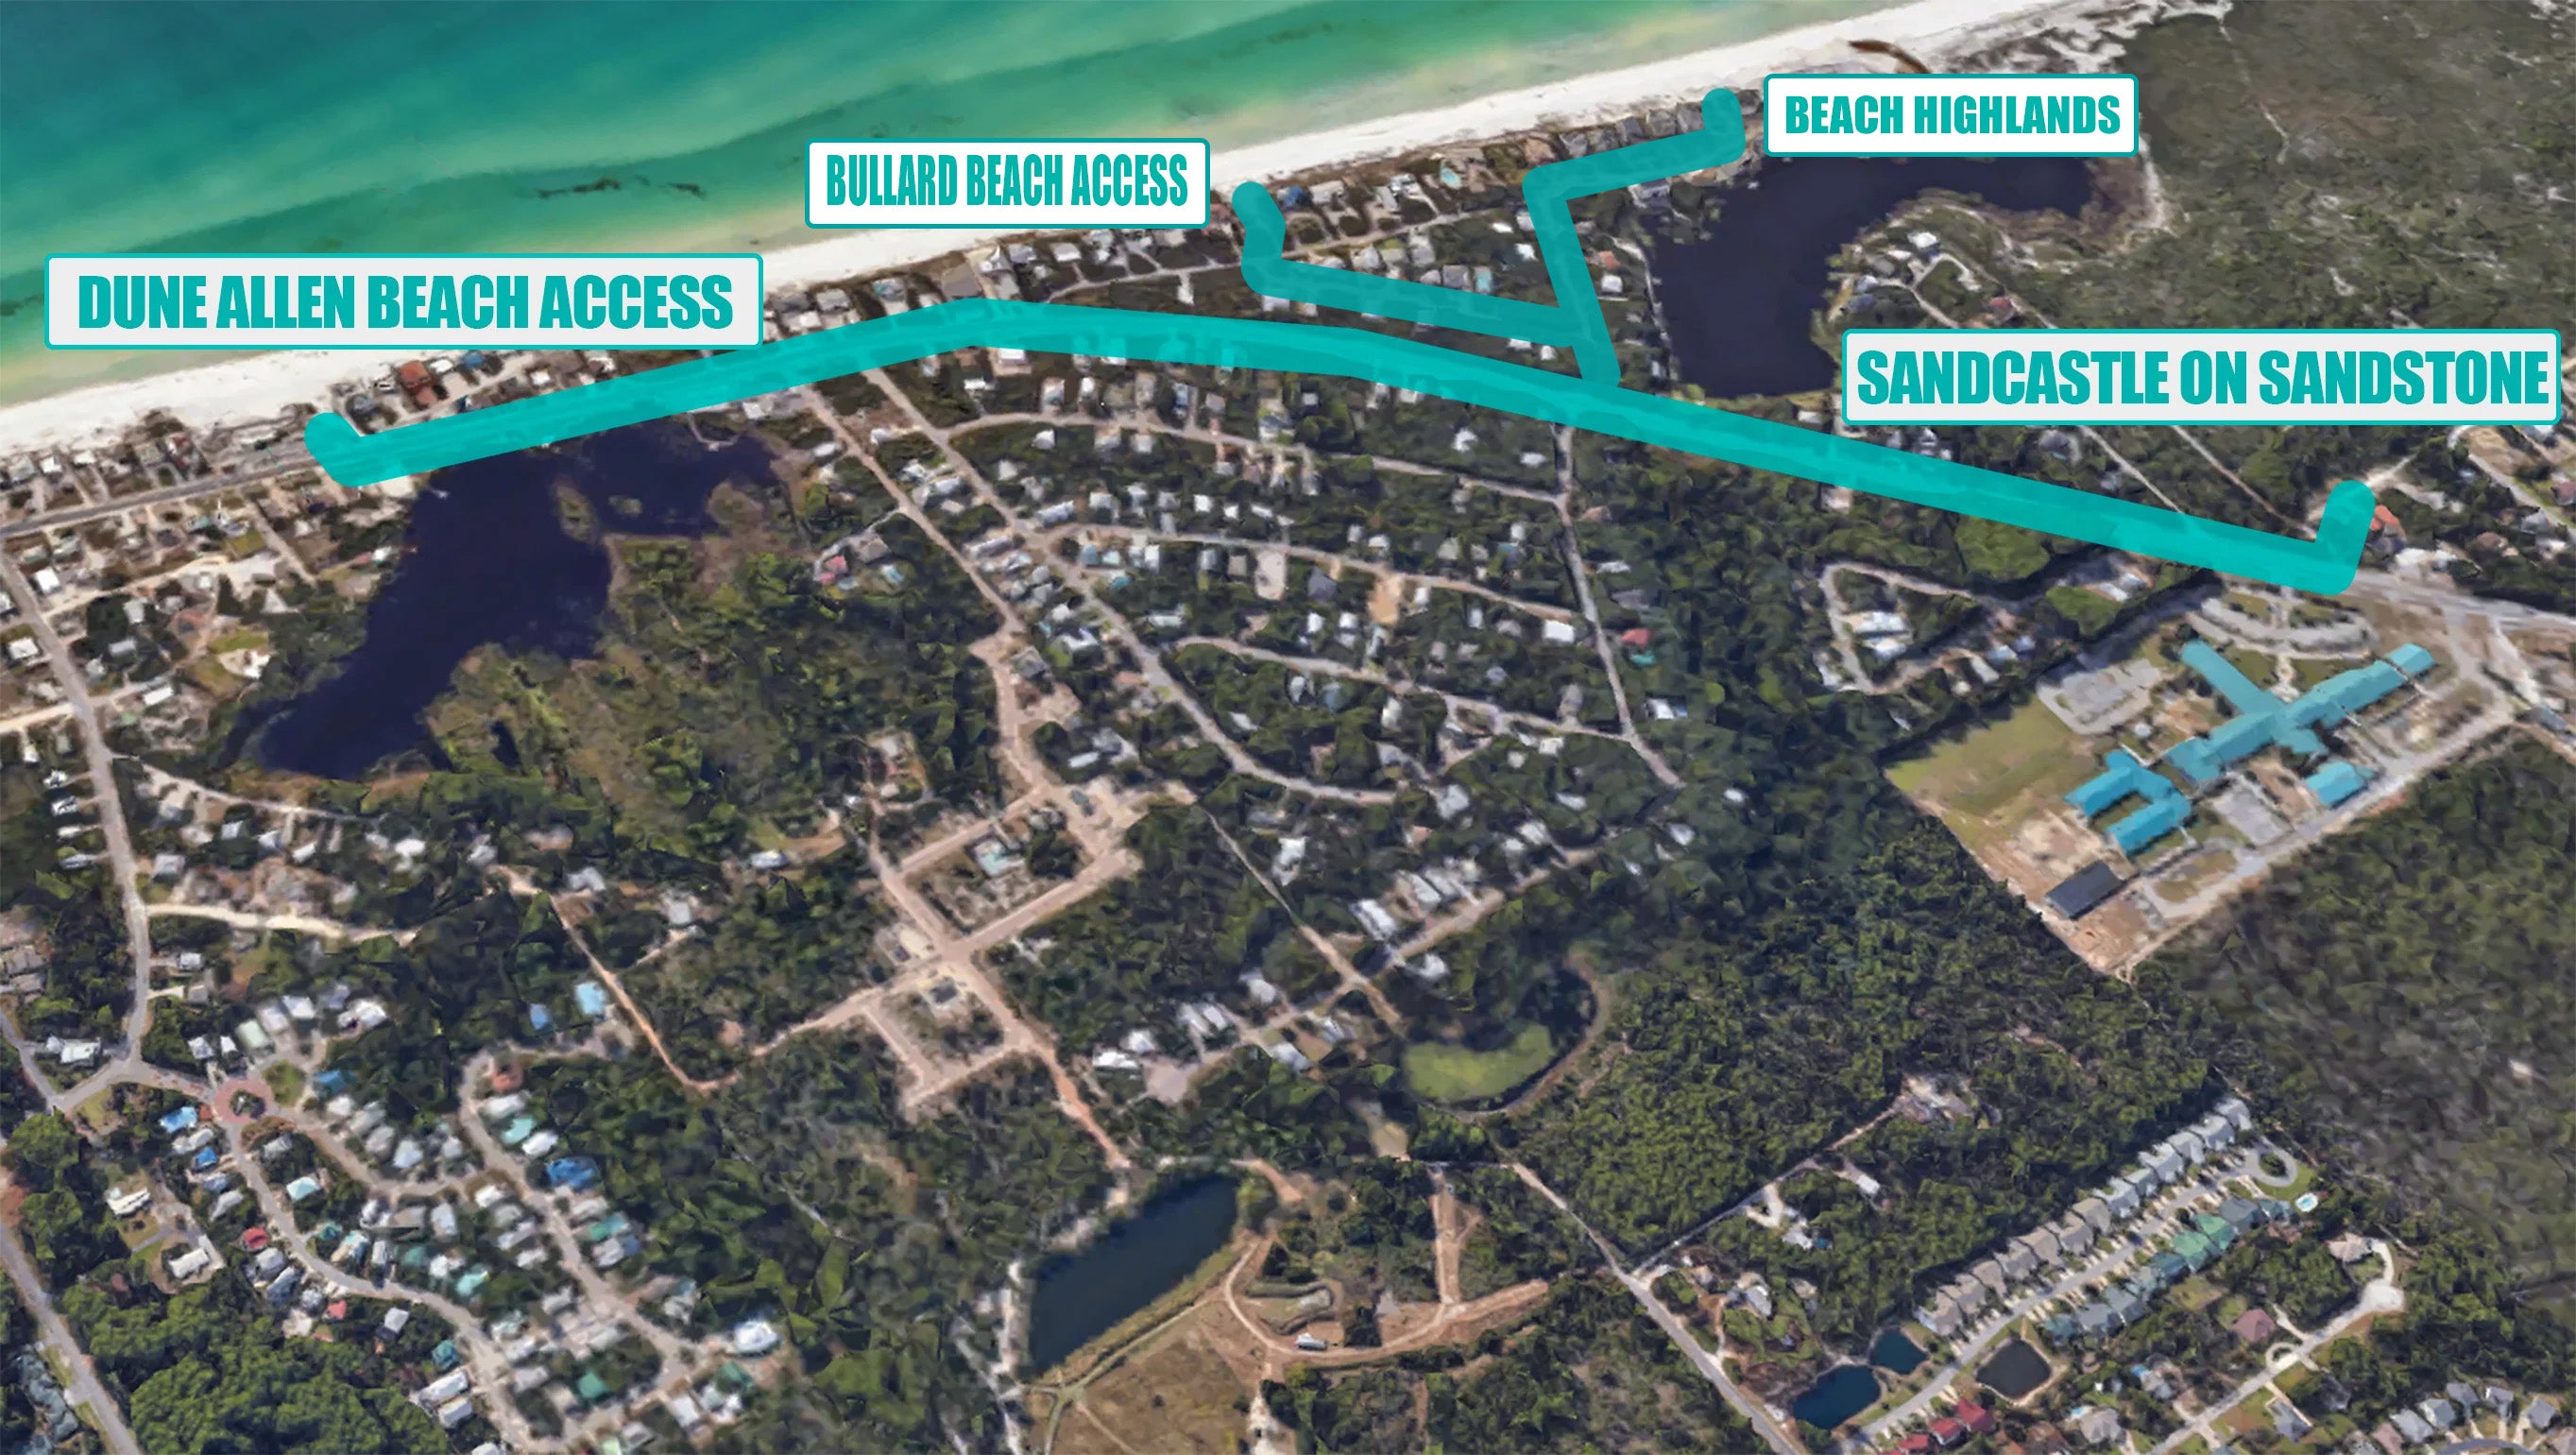 6 Beach Access Points within 1 Mile